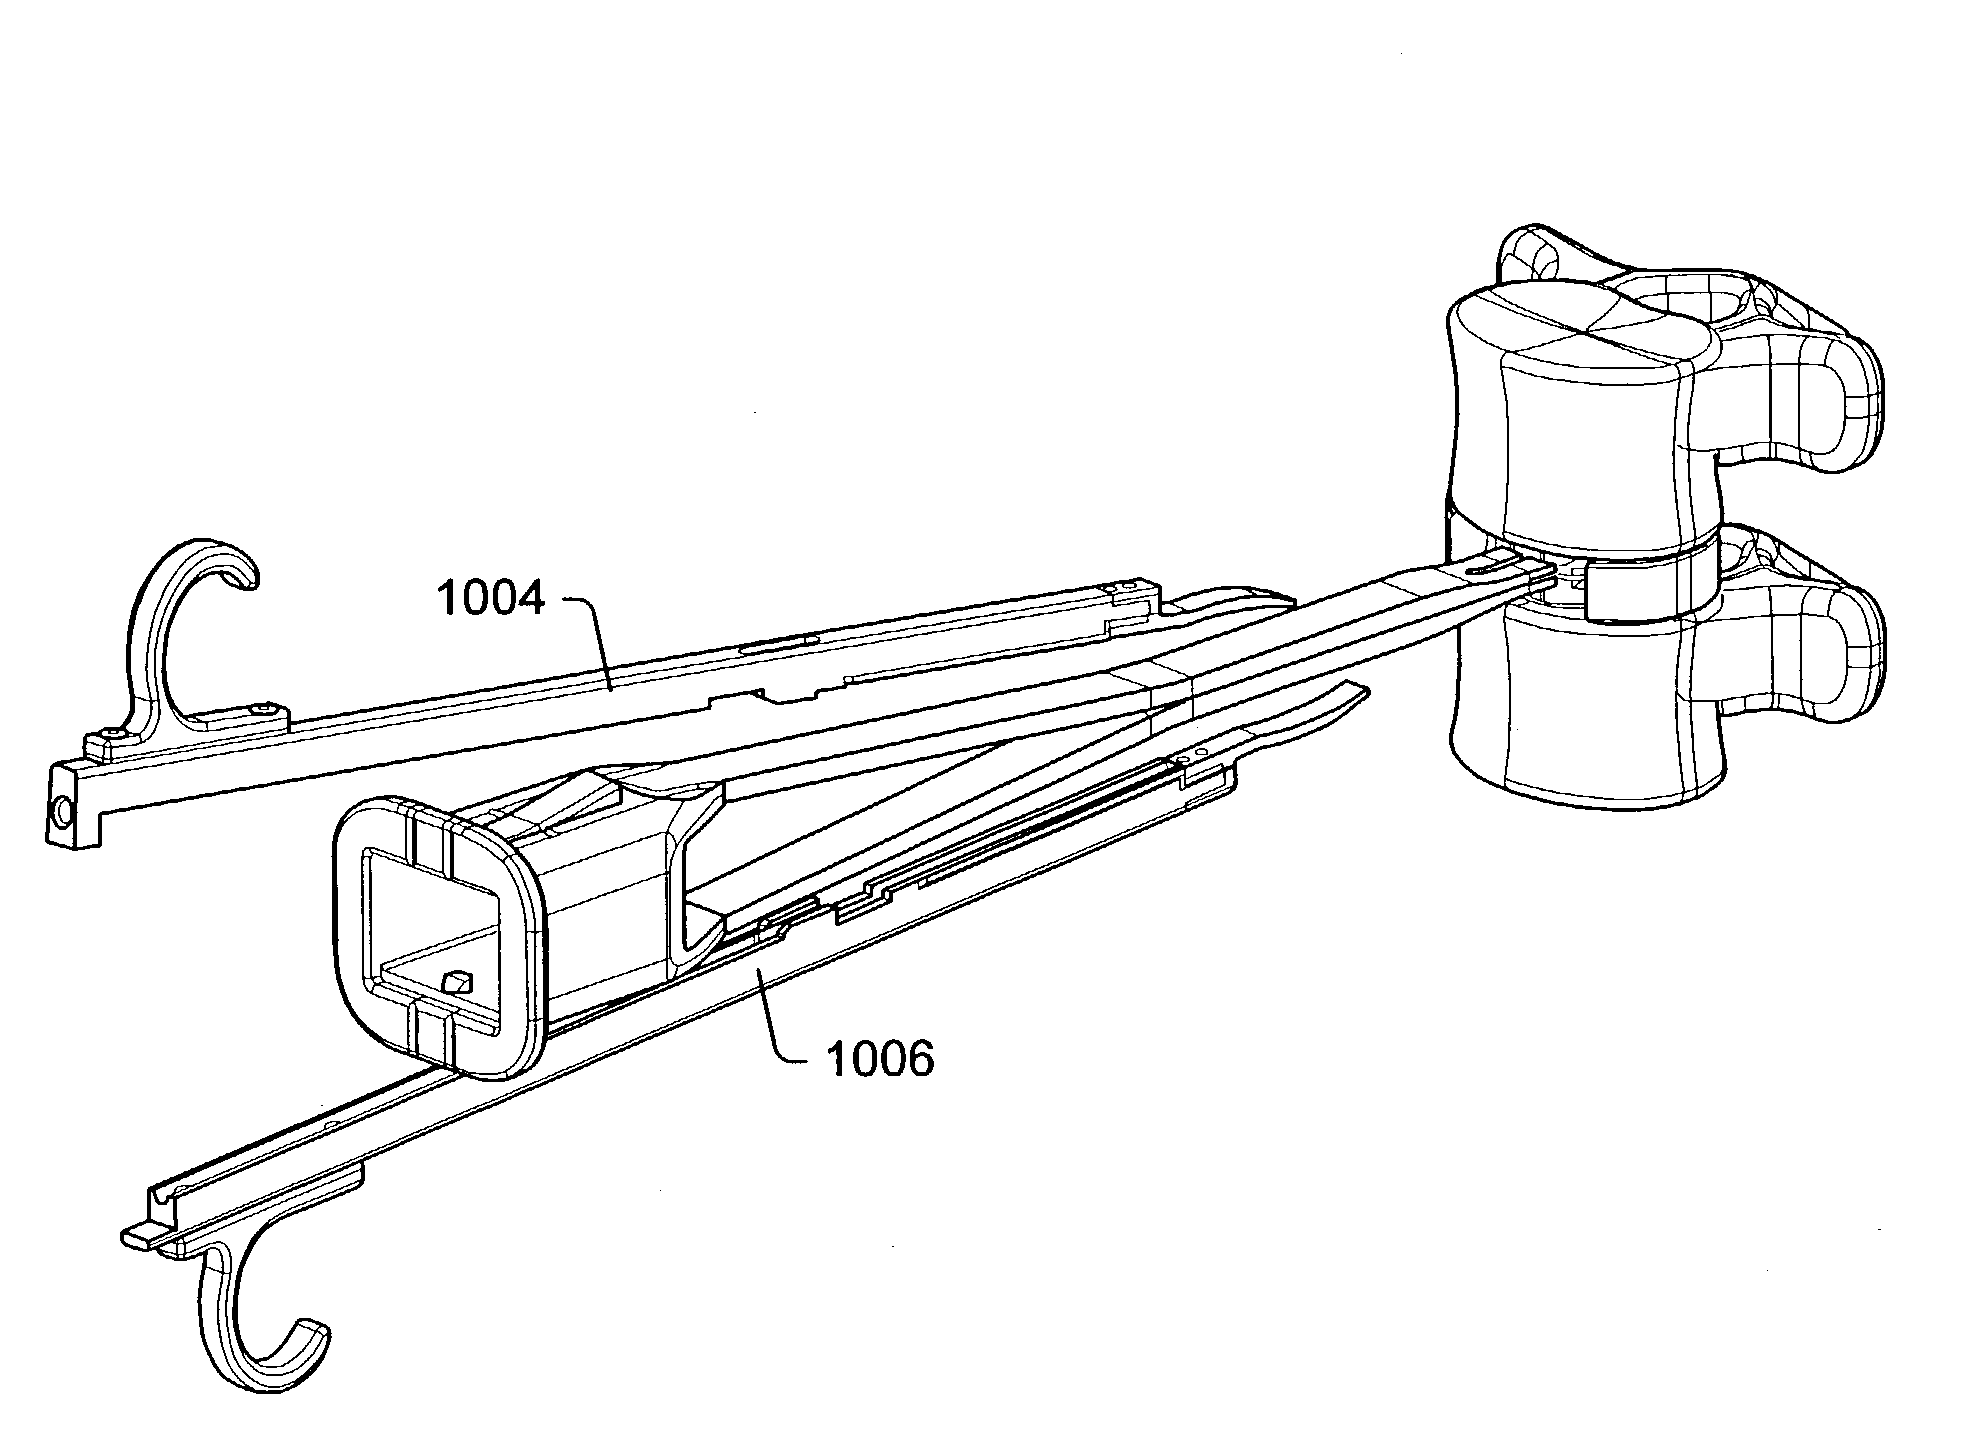 Spinal implant including a compressible connector